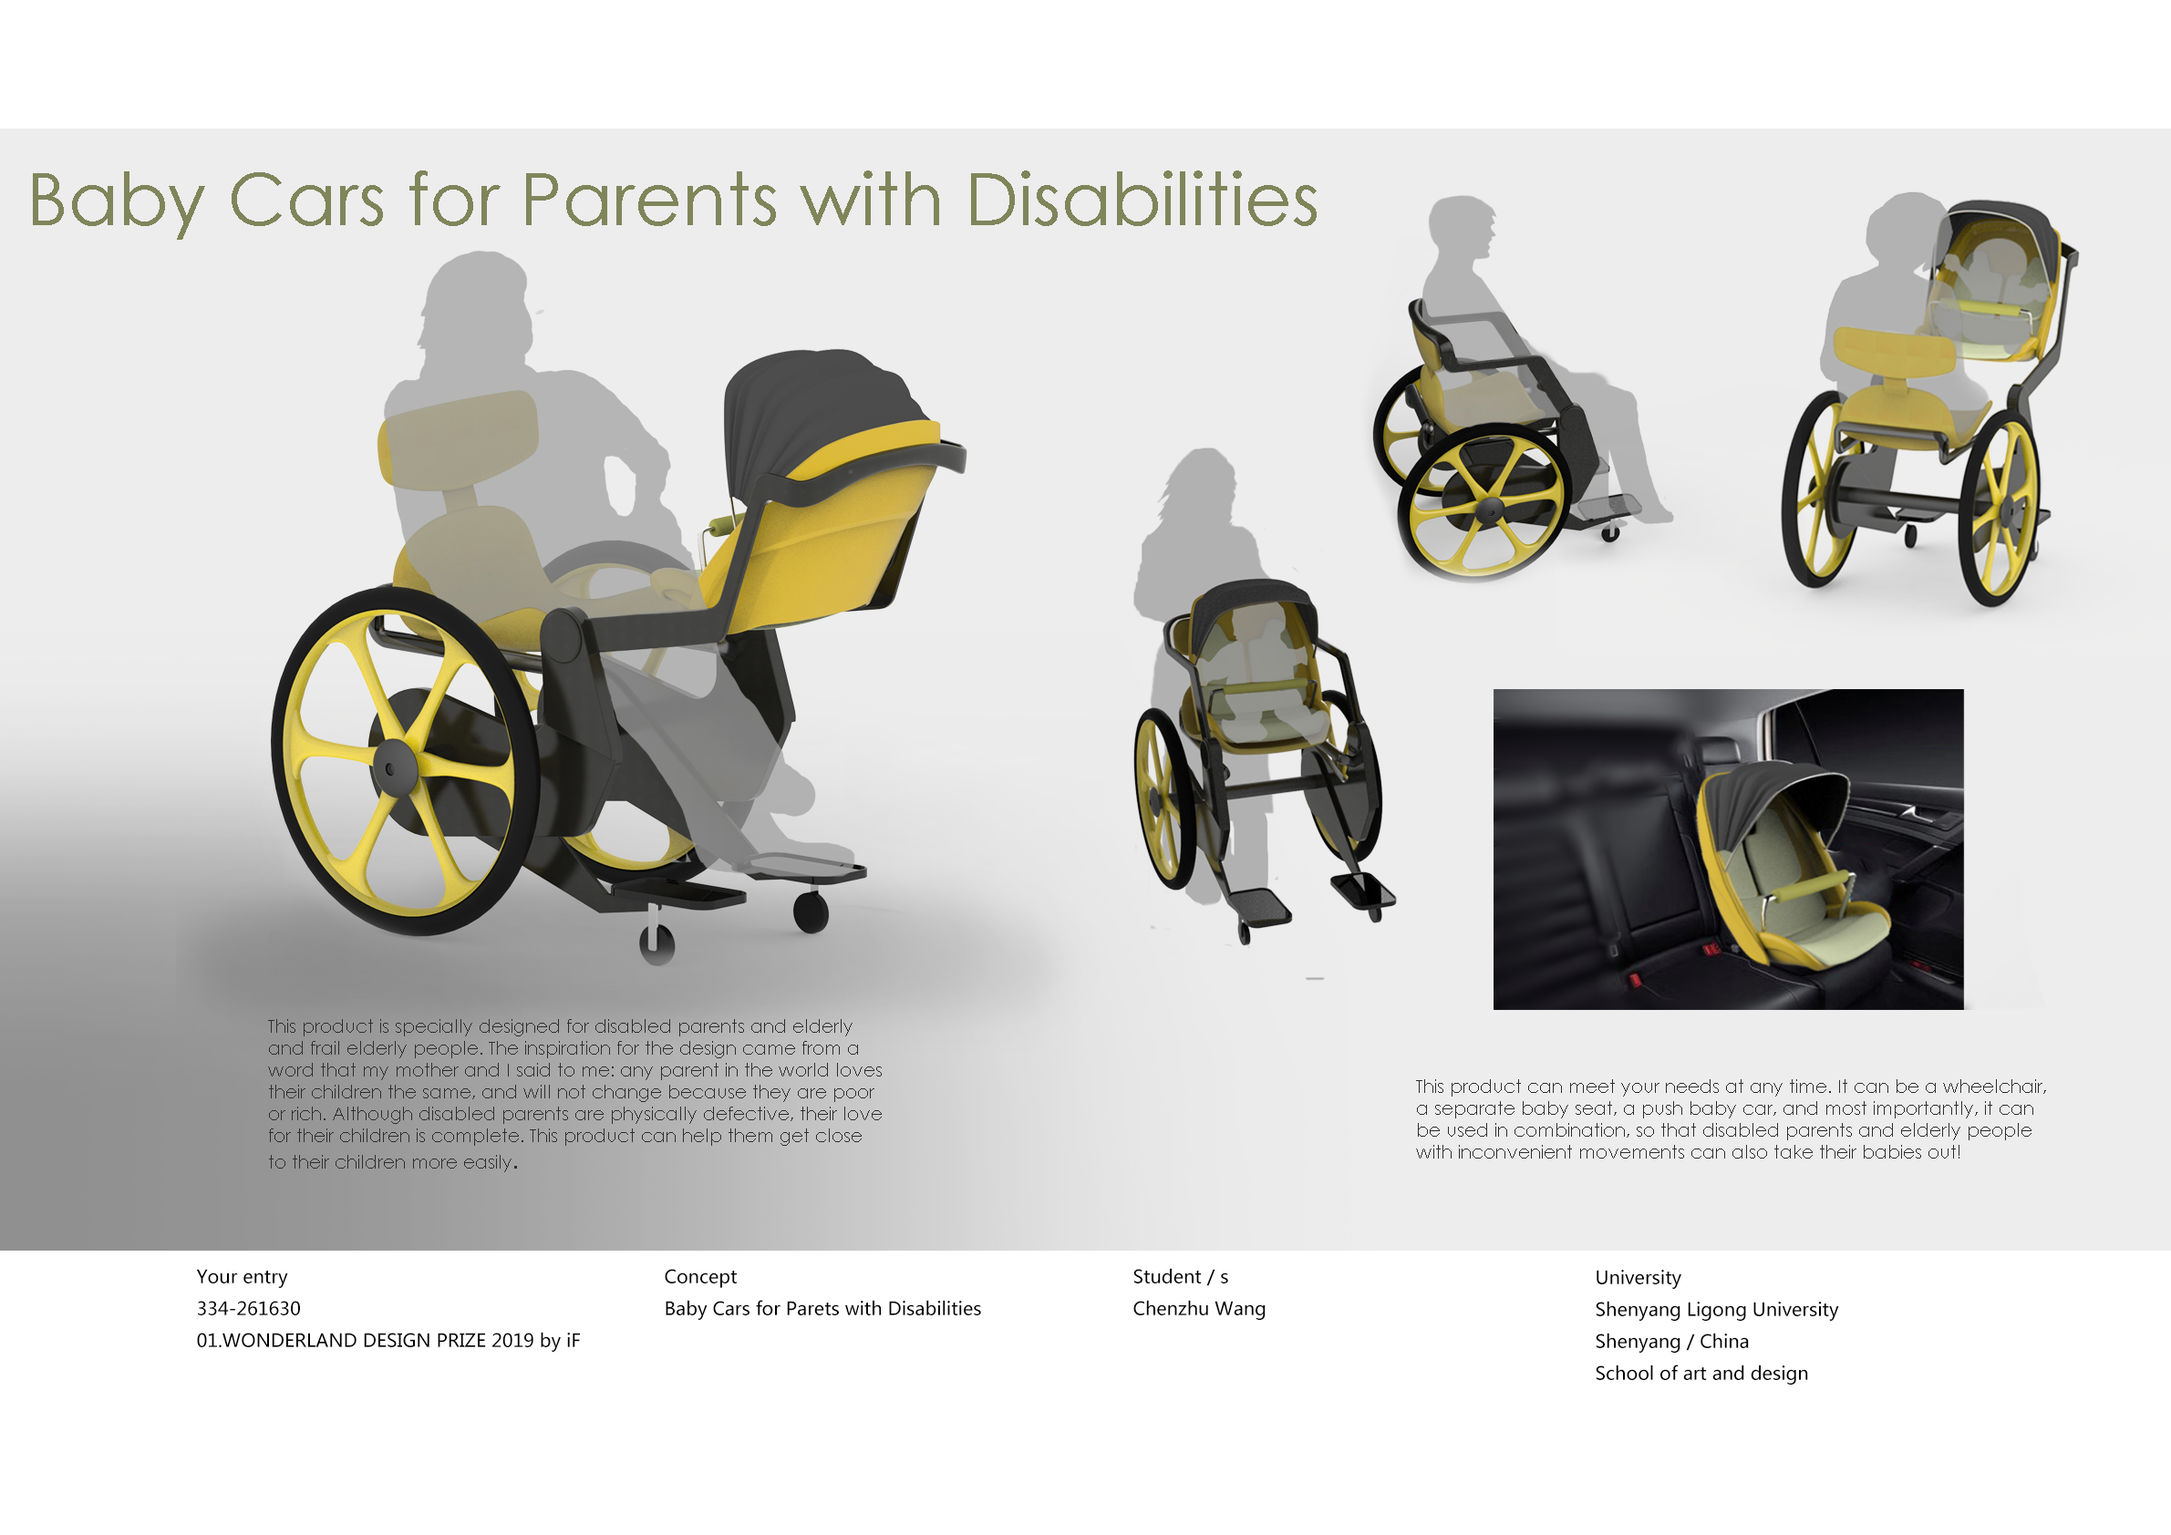 Baby-car for disabilities